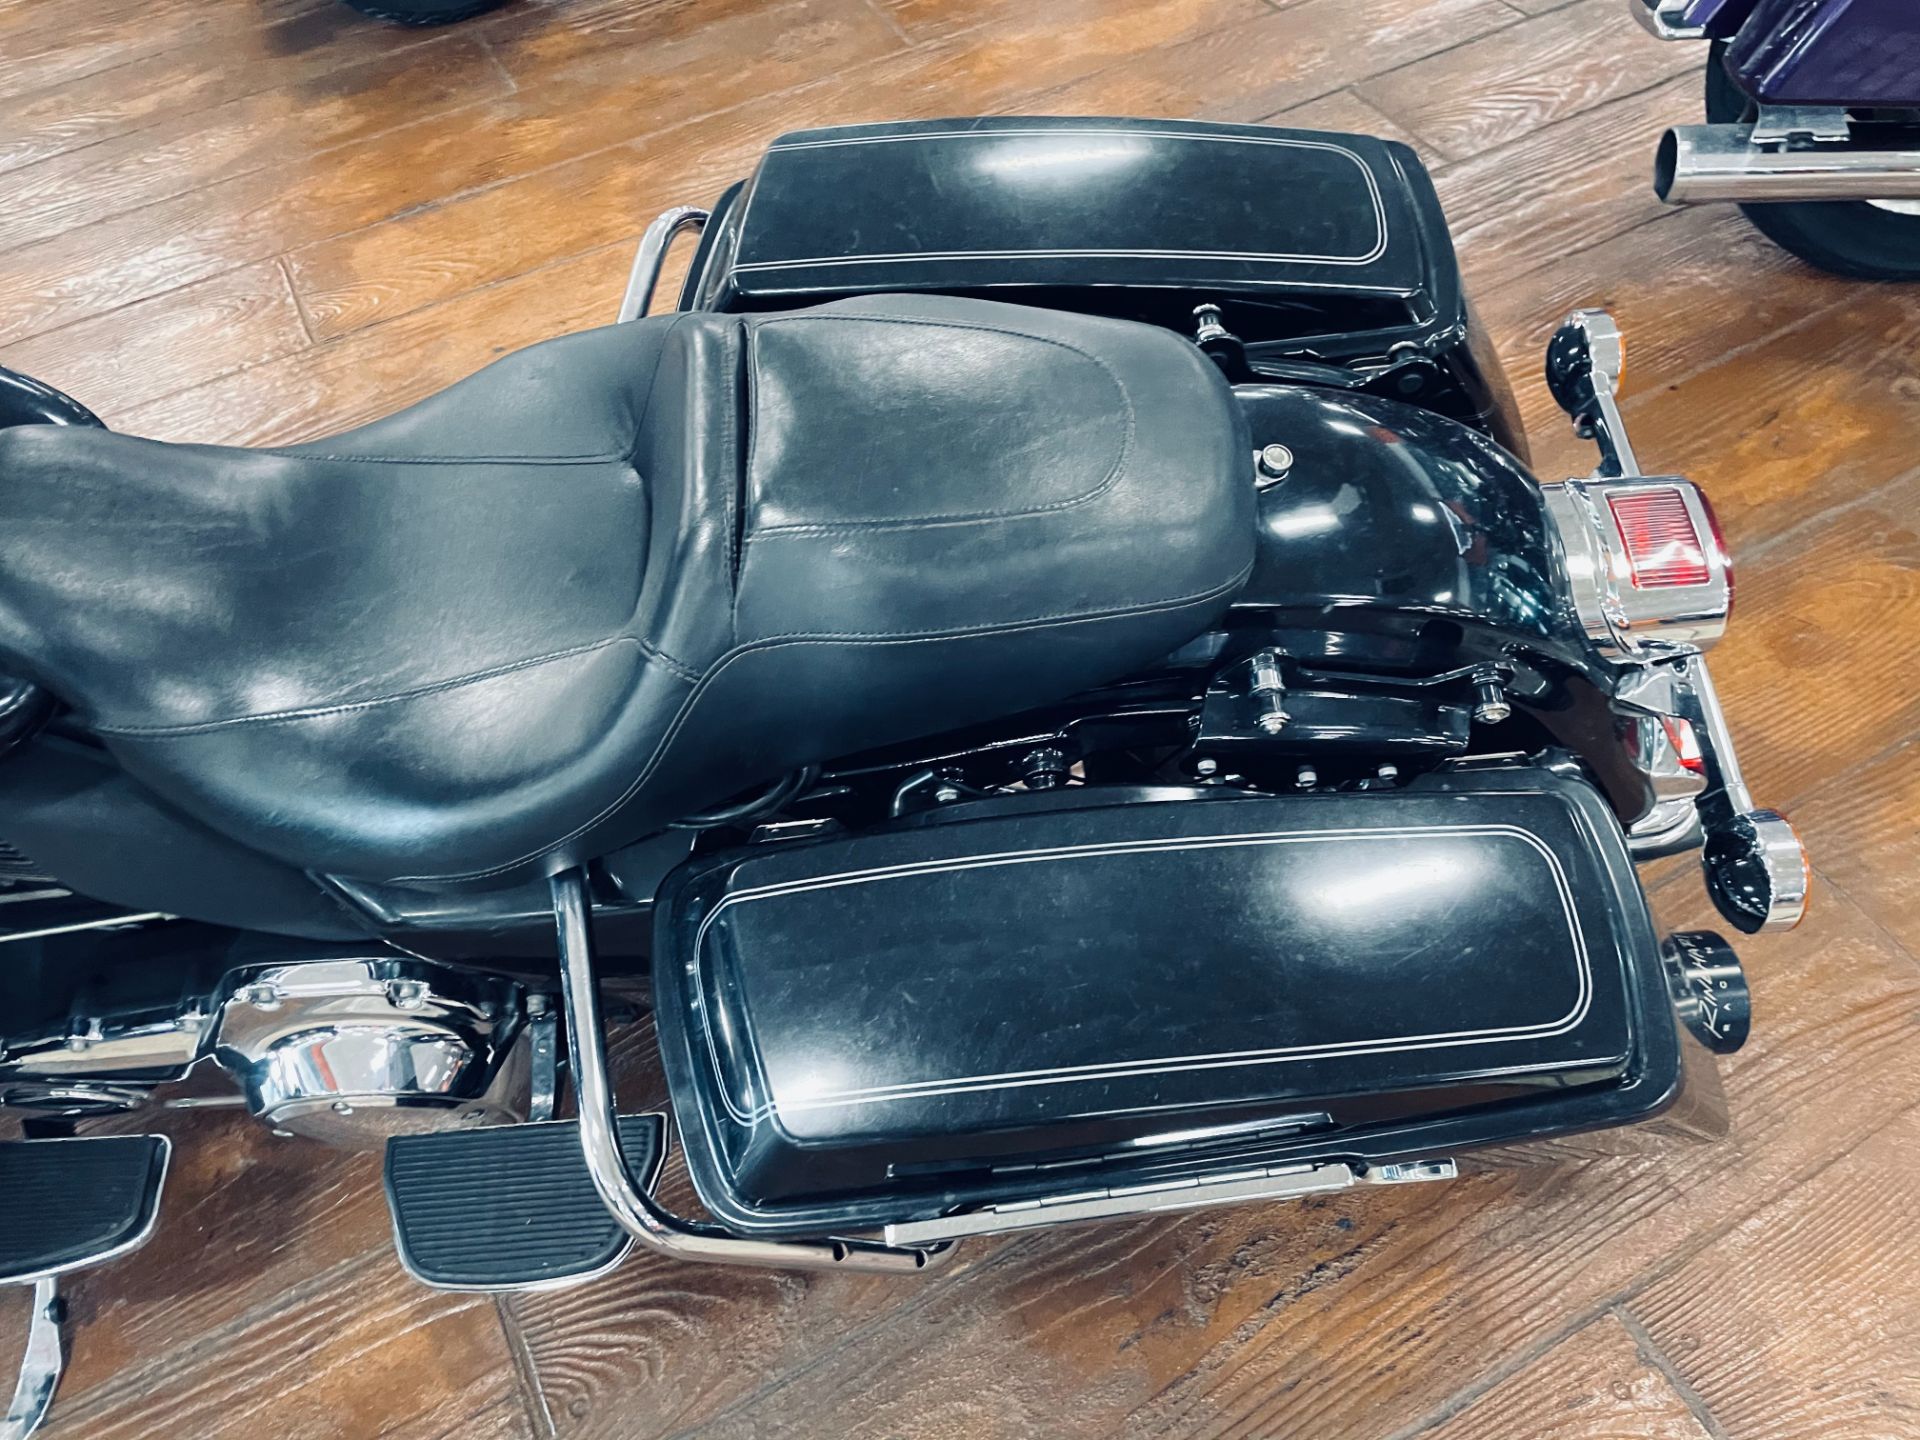 2018 Harley-Davidson Road King Special in Marion, Illinois - Photo 23